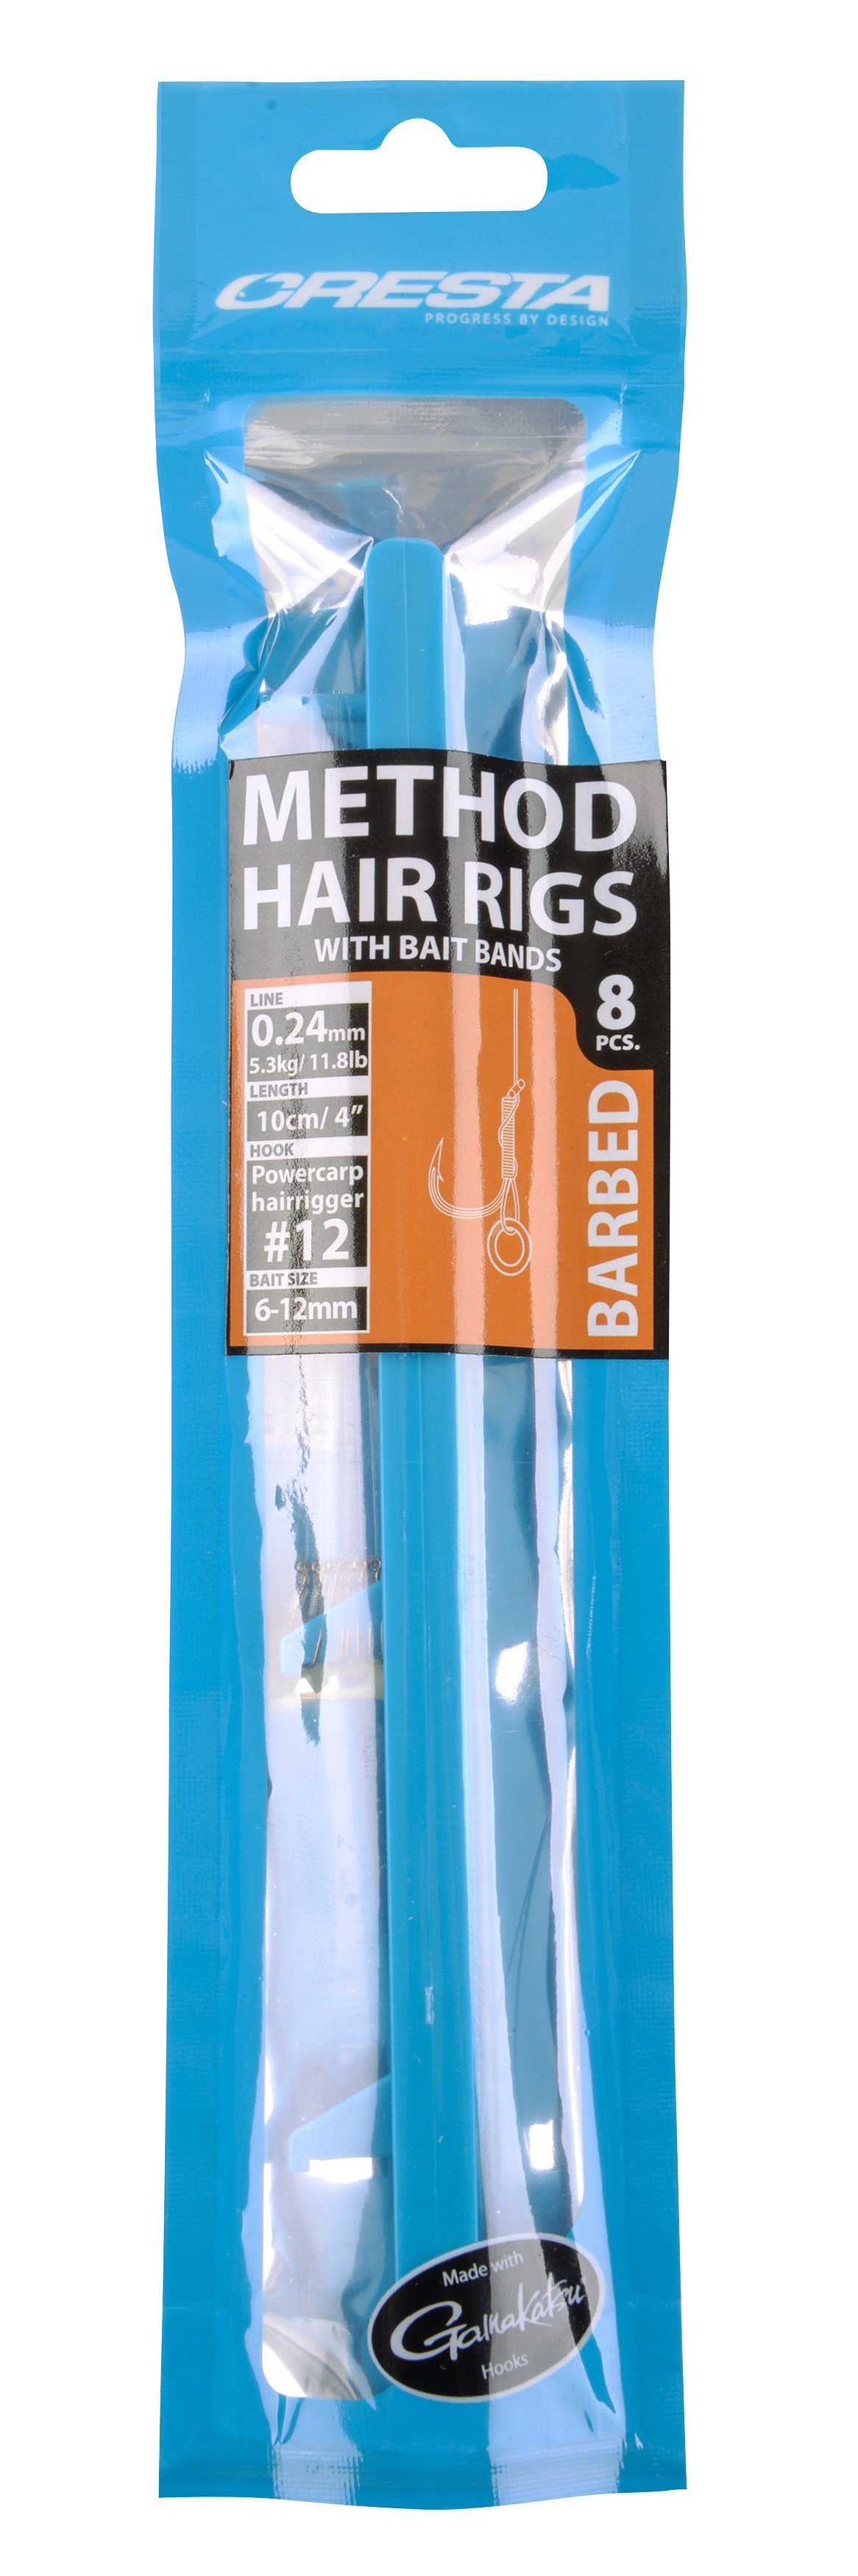 Spro - Cresta Method Hair Rigs With Bait Bands Barbed 4" – 10 cm Size 16